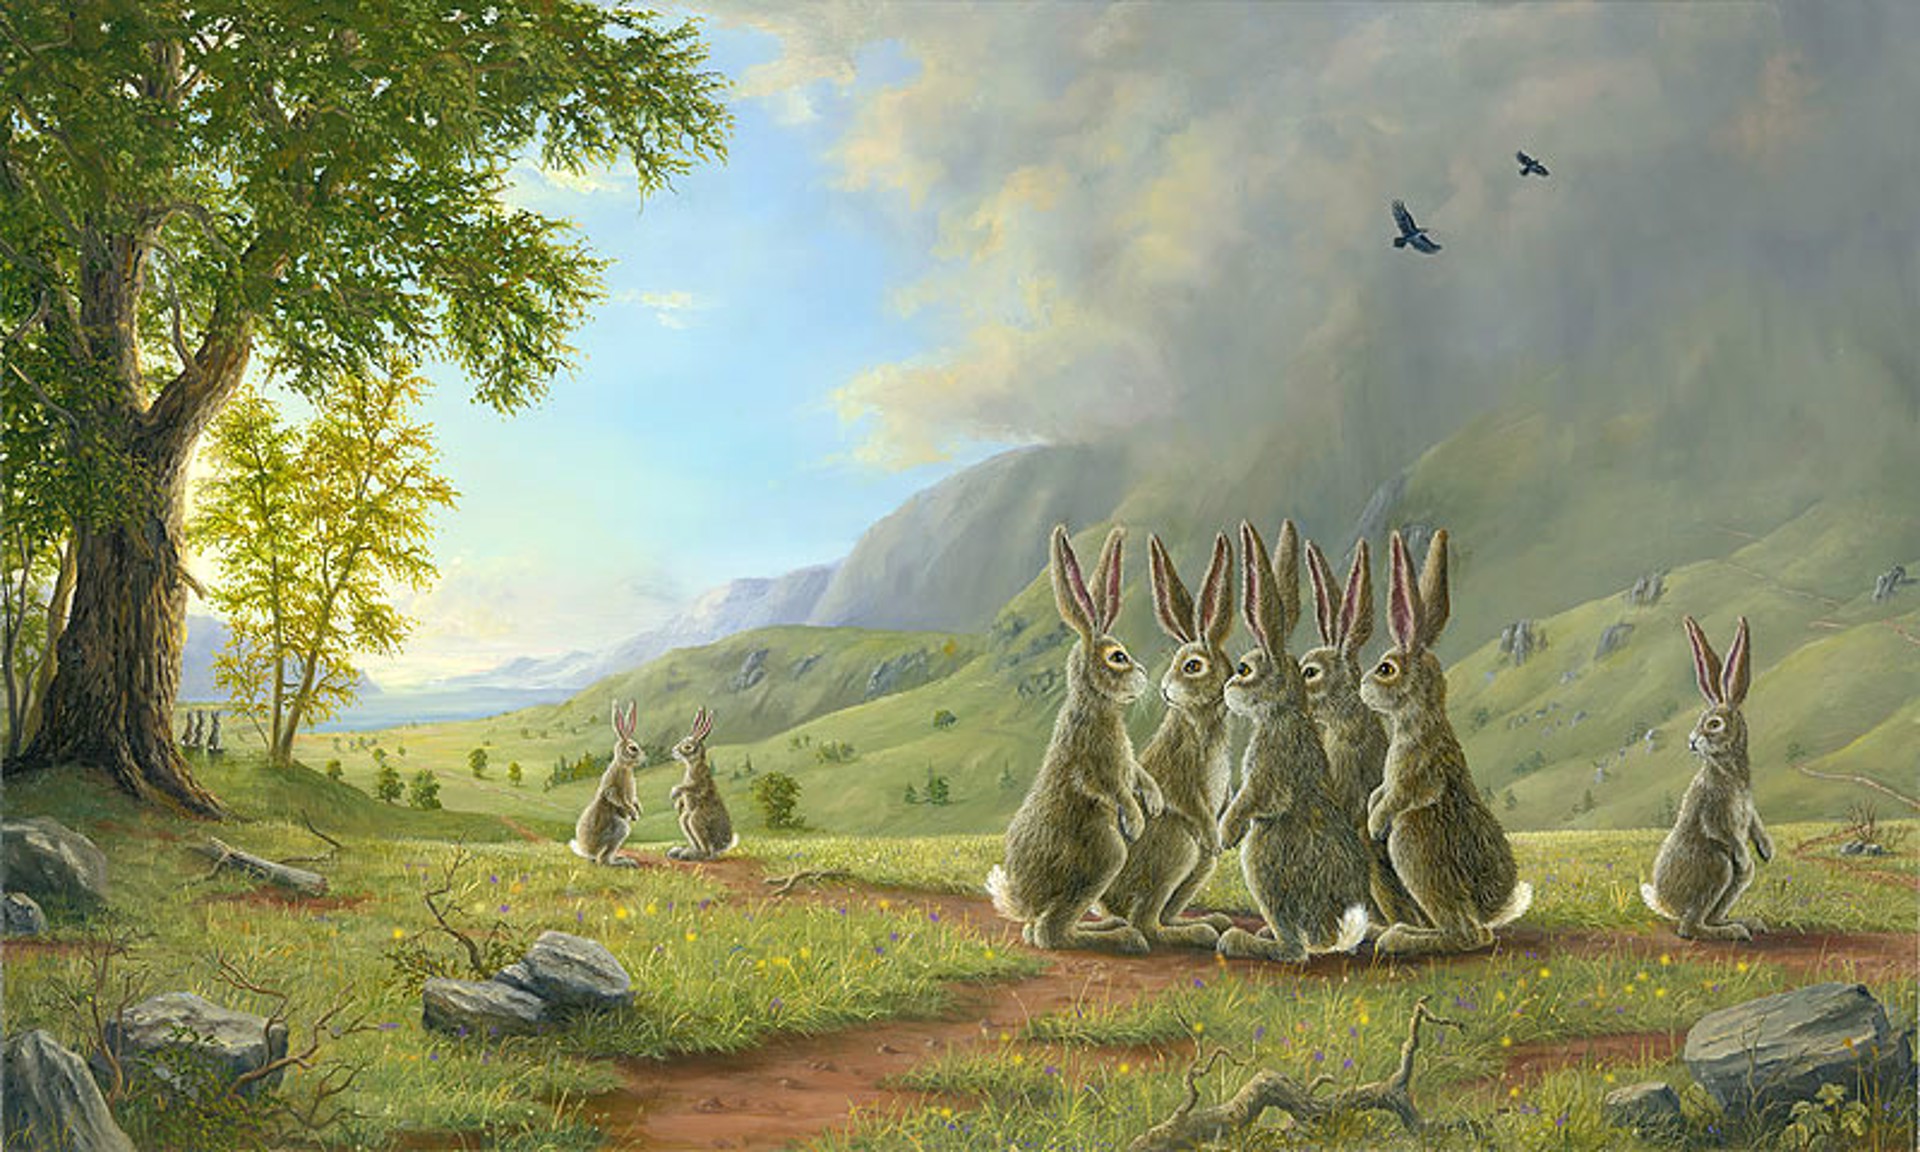 The Decision - SOLD OUT ON ALL EDITIONS by Robert Bissell